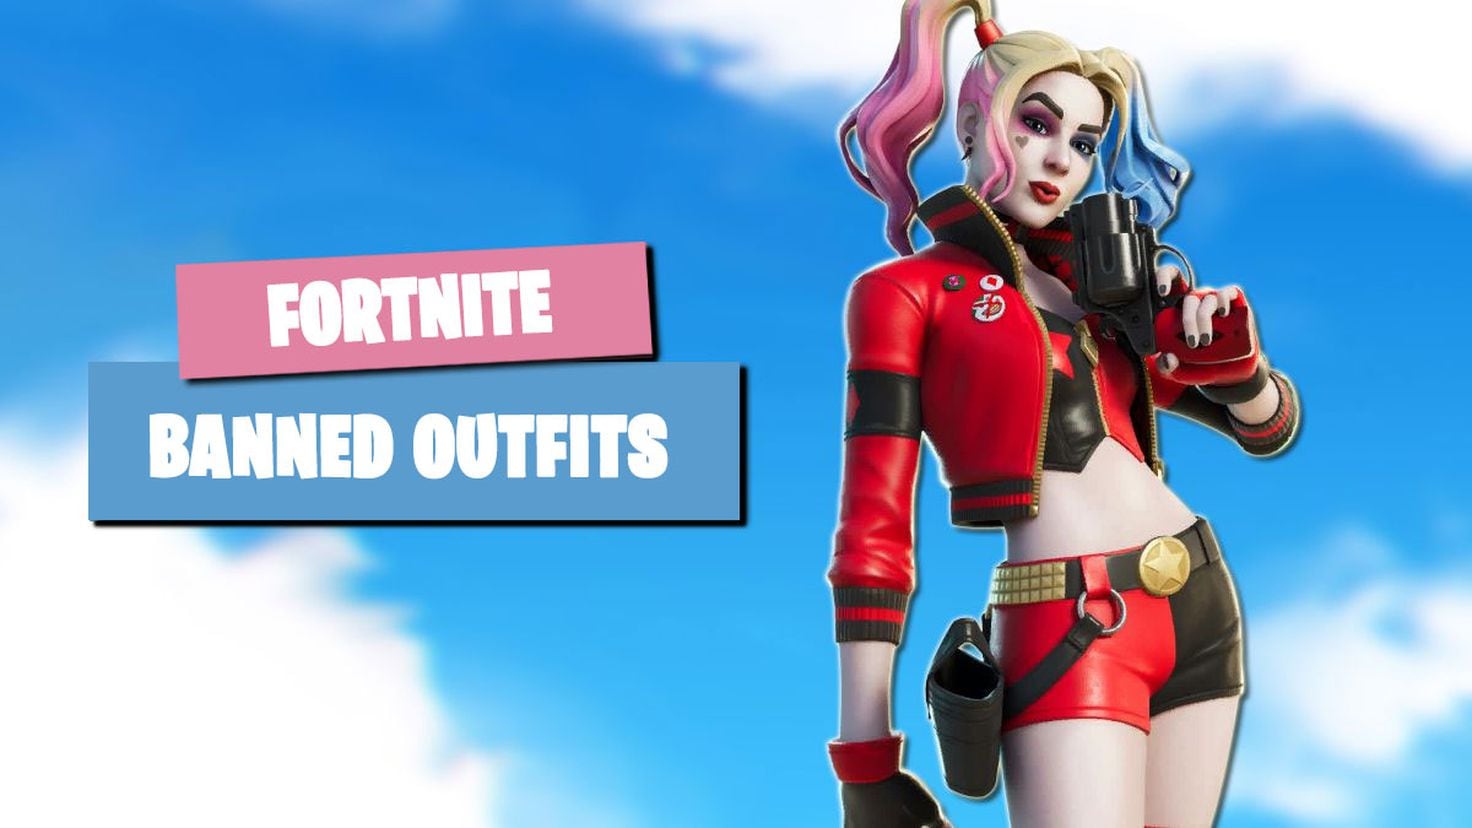 Fortnite prohibits sure clothes objects on completely different maps and modes attributable to its age ranking system